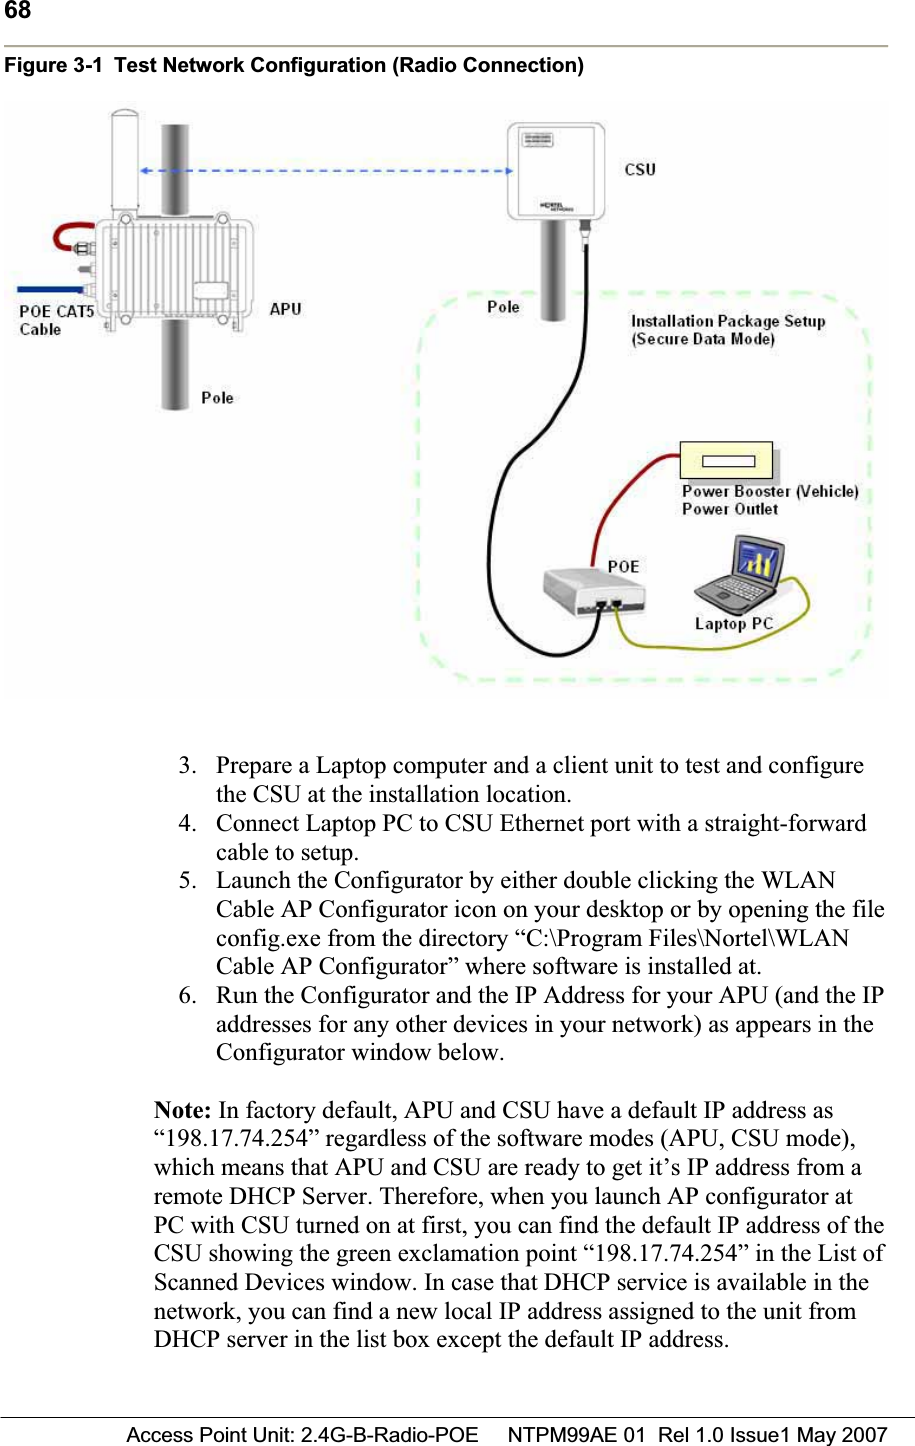 68 Access Point Unit: 2.4G-B-Radio-POE     NTPM99AE 01  Rel 1.0 Issue1 May 2007Figure 3-1 Test Network Configuration (Radio Connection) 3. Prepare a Laptop computer and a client unit to test and configure the CSU at the installation location.4. Connect Laptop PC to CSU Ethernet port with a straight-forward cable to setup. 5. Launch the Configurator by either double clicking the WLAN Cable AP Configurator icon on your desktop or by opening the file config.exe from the directory “C:\Program Files\Nortel\WLAN Cable AP Configurator” where software is installed at.  6. Run the Configurator and the IP Address for your APU (and the IP addresses for any other devices in your network) as appears in the Configurator window below. Note: In factory default, APU and CSU have a default IP address as “198.17.74.254” regardless of the software modes (APU, CSU mode), which means that APU and CSU are ready to get it’s IP address from a remote DHCP Server. Therefore, when you launch AP configurator at PC with CSU turned on at first, you can find the default IP address of the CSU showing the green exclamation point “198.17.74.254” in the List of Scanned Devices window. In case that DHCP service is available in the  network, you can find a new local IP address assigned to the unit from DHCP server in the list box except the default IP address.